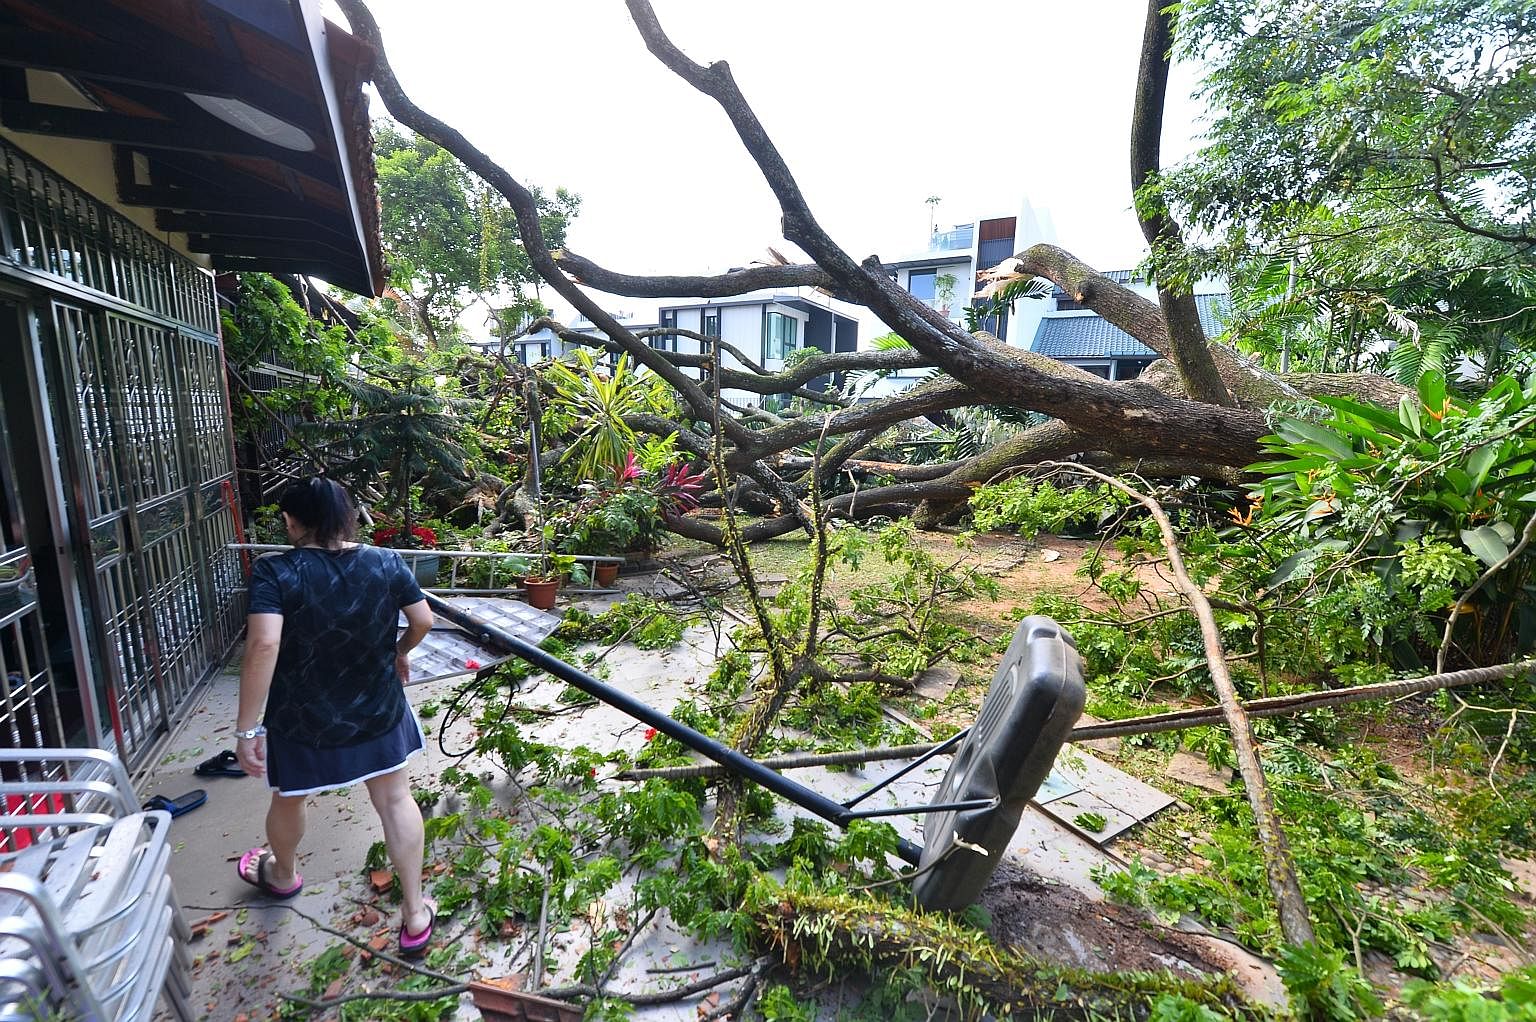 A rain tree, believed to be more than four storeys tall and over 50 years old, fell at Kismis Court condominium in Toh Yi Road off Bukit Timah on Monday night. Residents of the condominium were woken up by a loud crashing noise as the tree fell on so